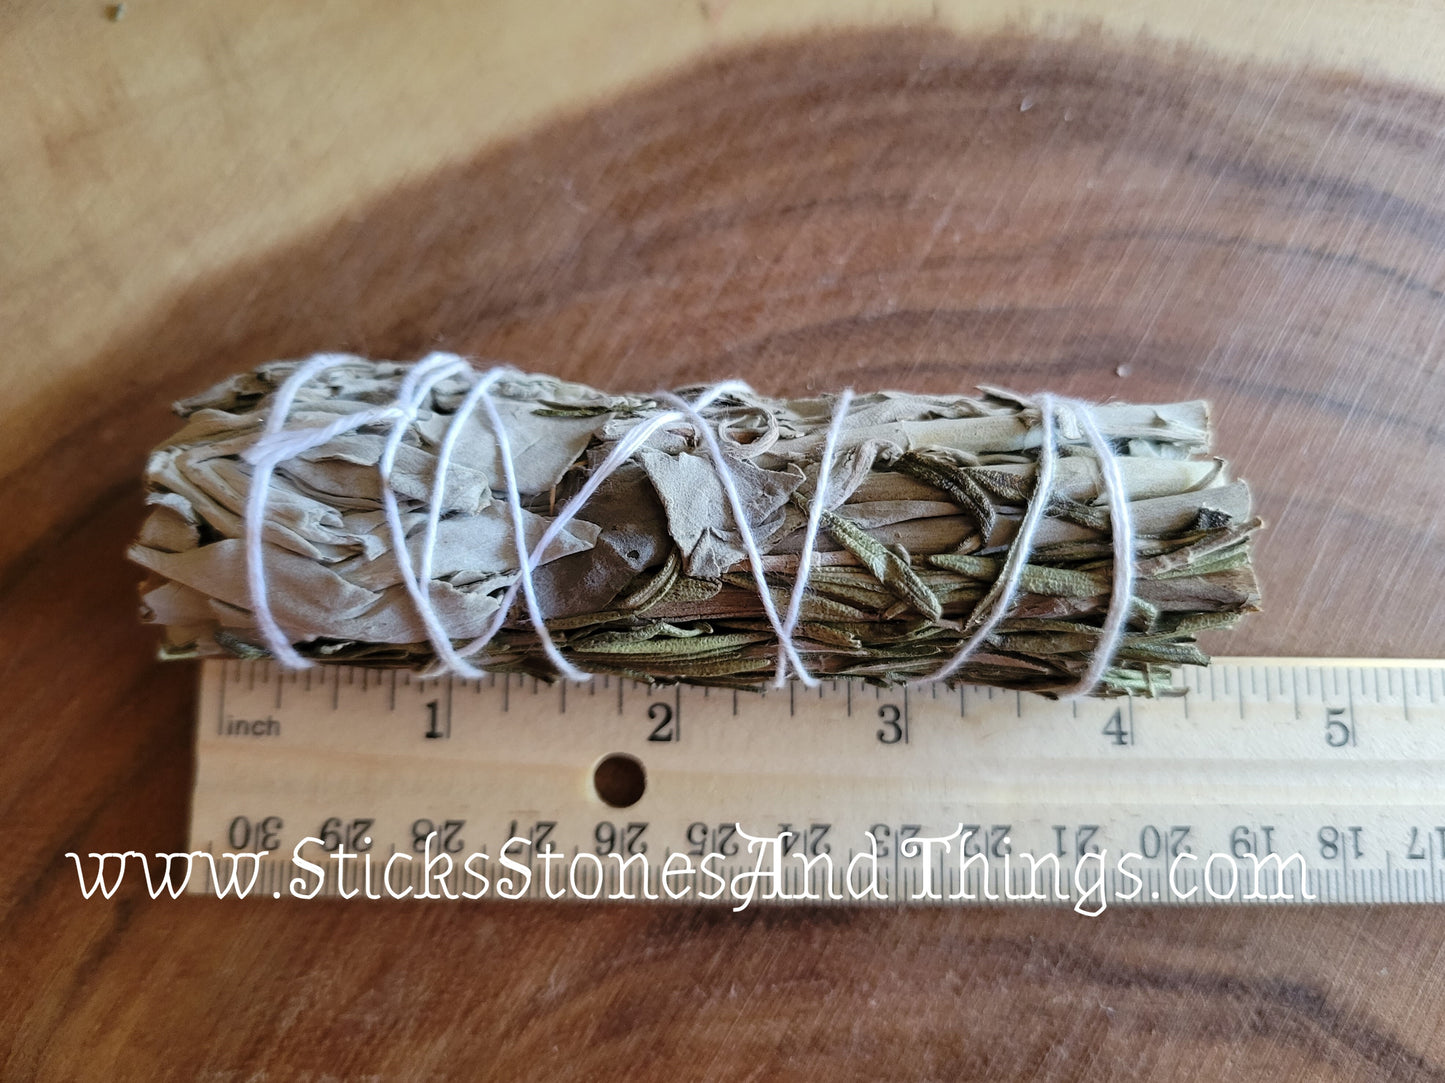 White Sage with Rosemary Smudge Stick 4 inches